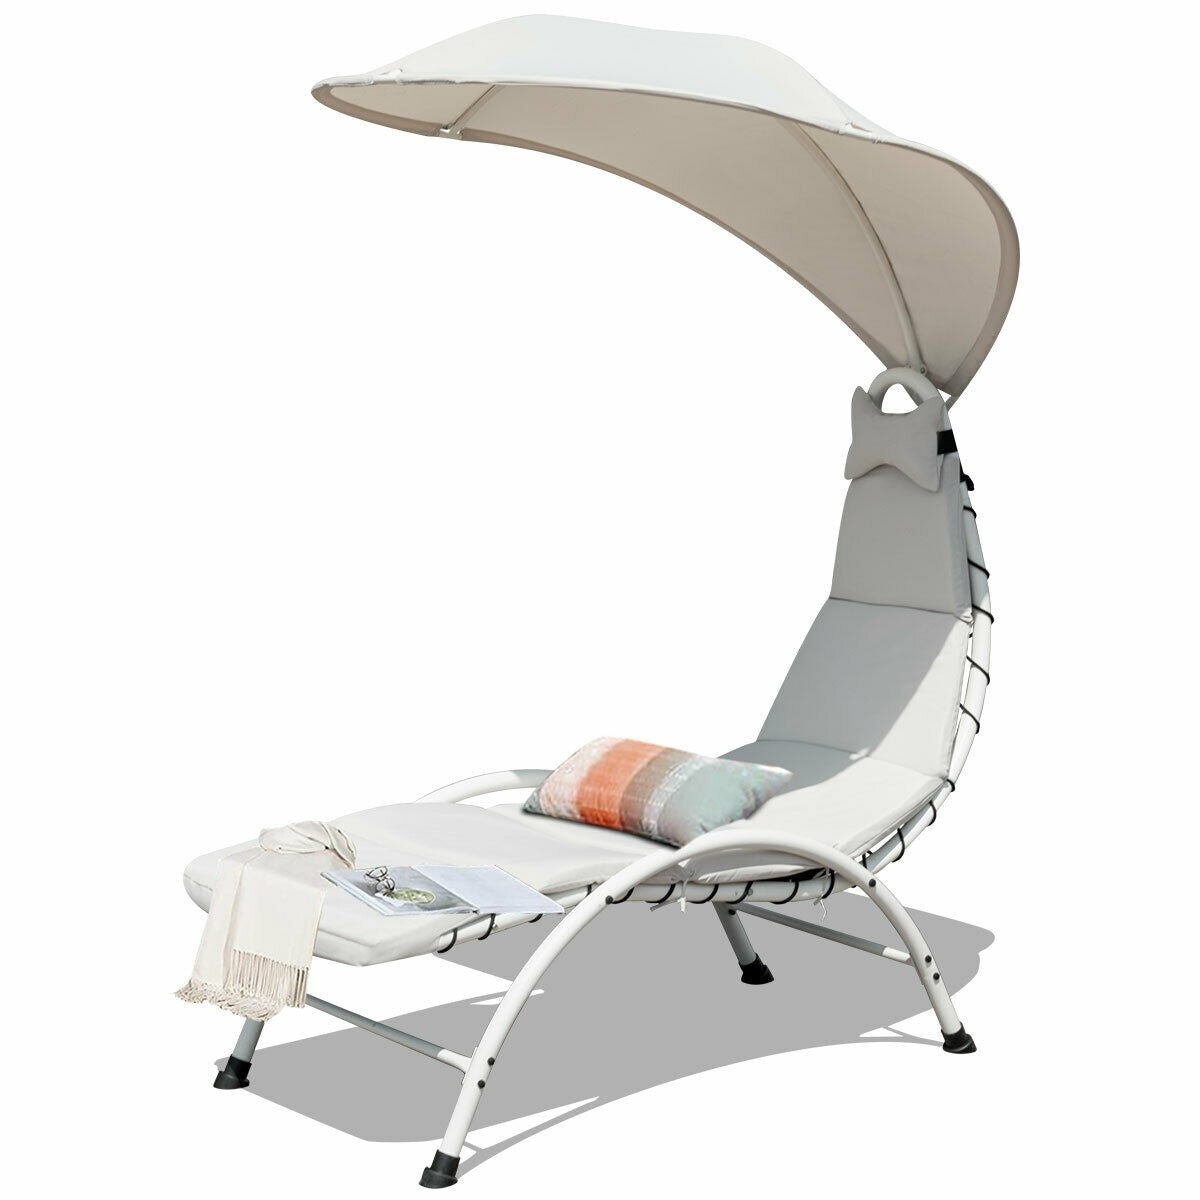 Lounger Chair w/ Canopy, Removable Headrest, Patio Chaise with Cushion